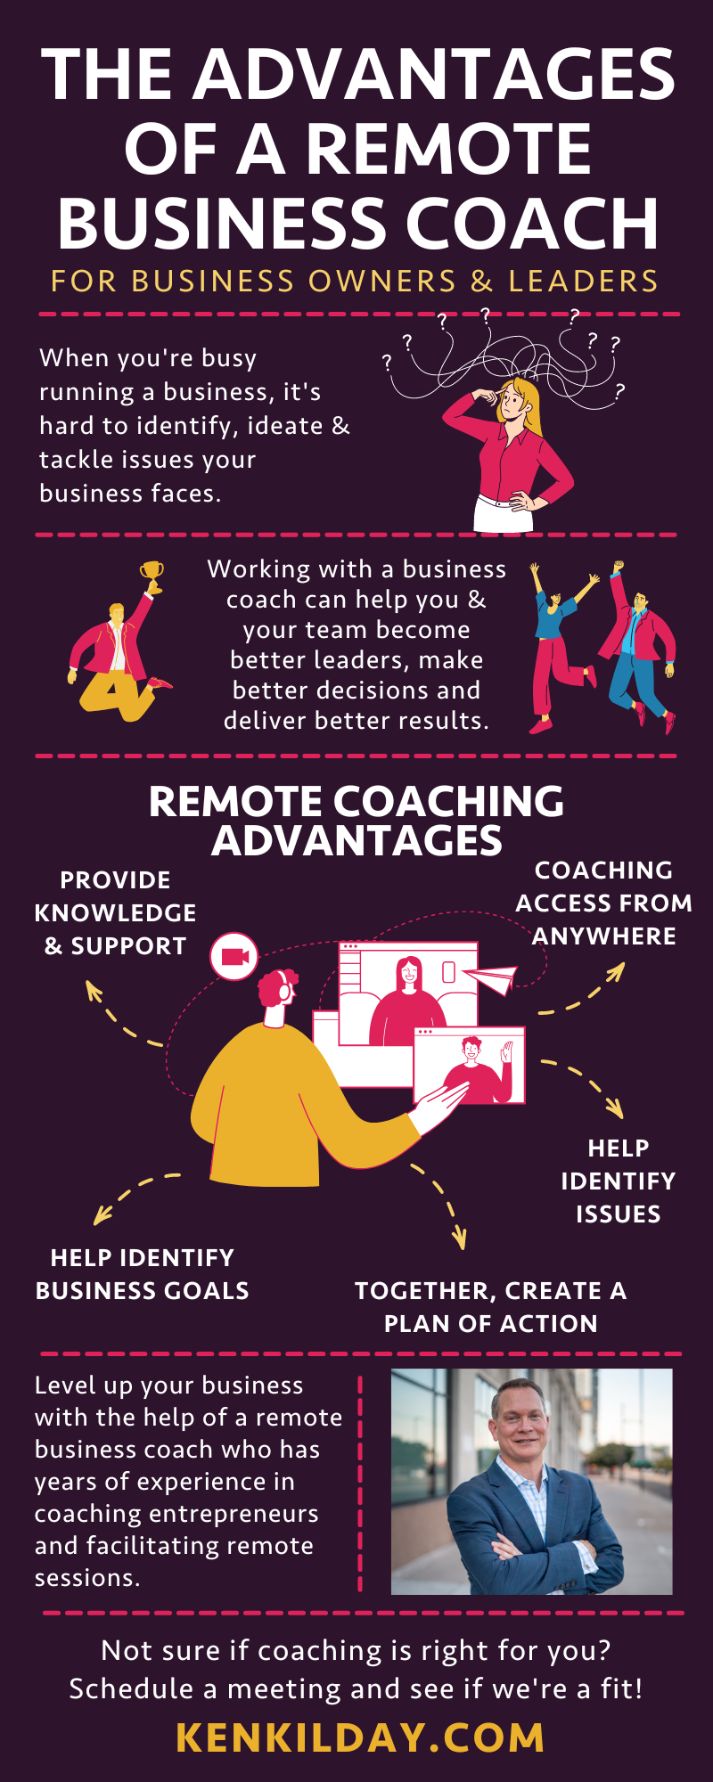 Infographic describing The Advantages of Working With a Remote Business Coach